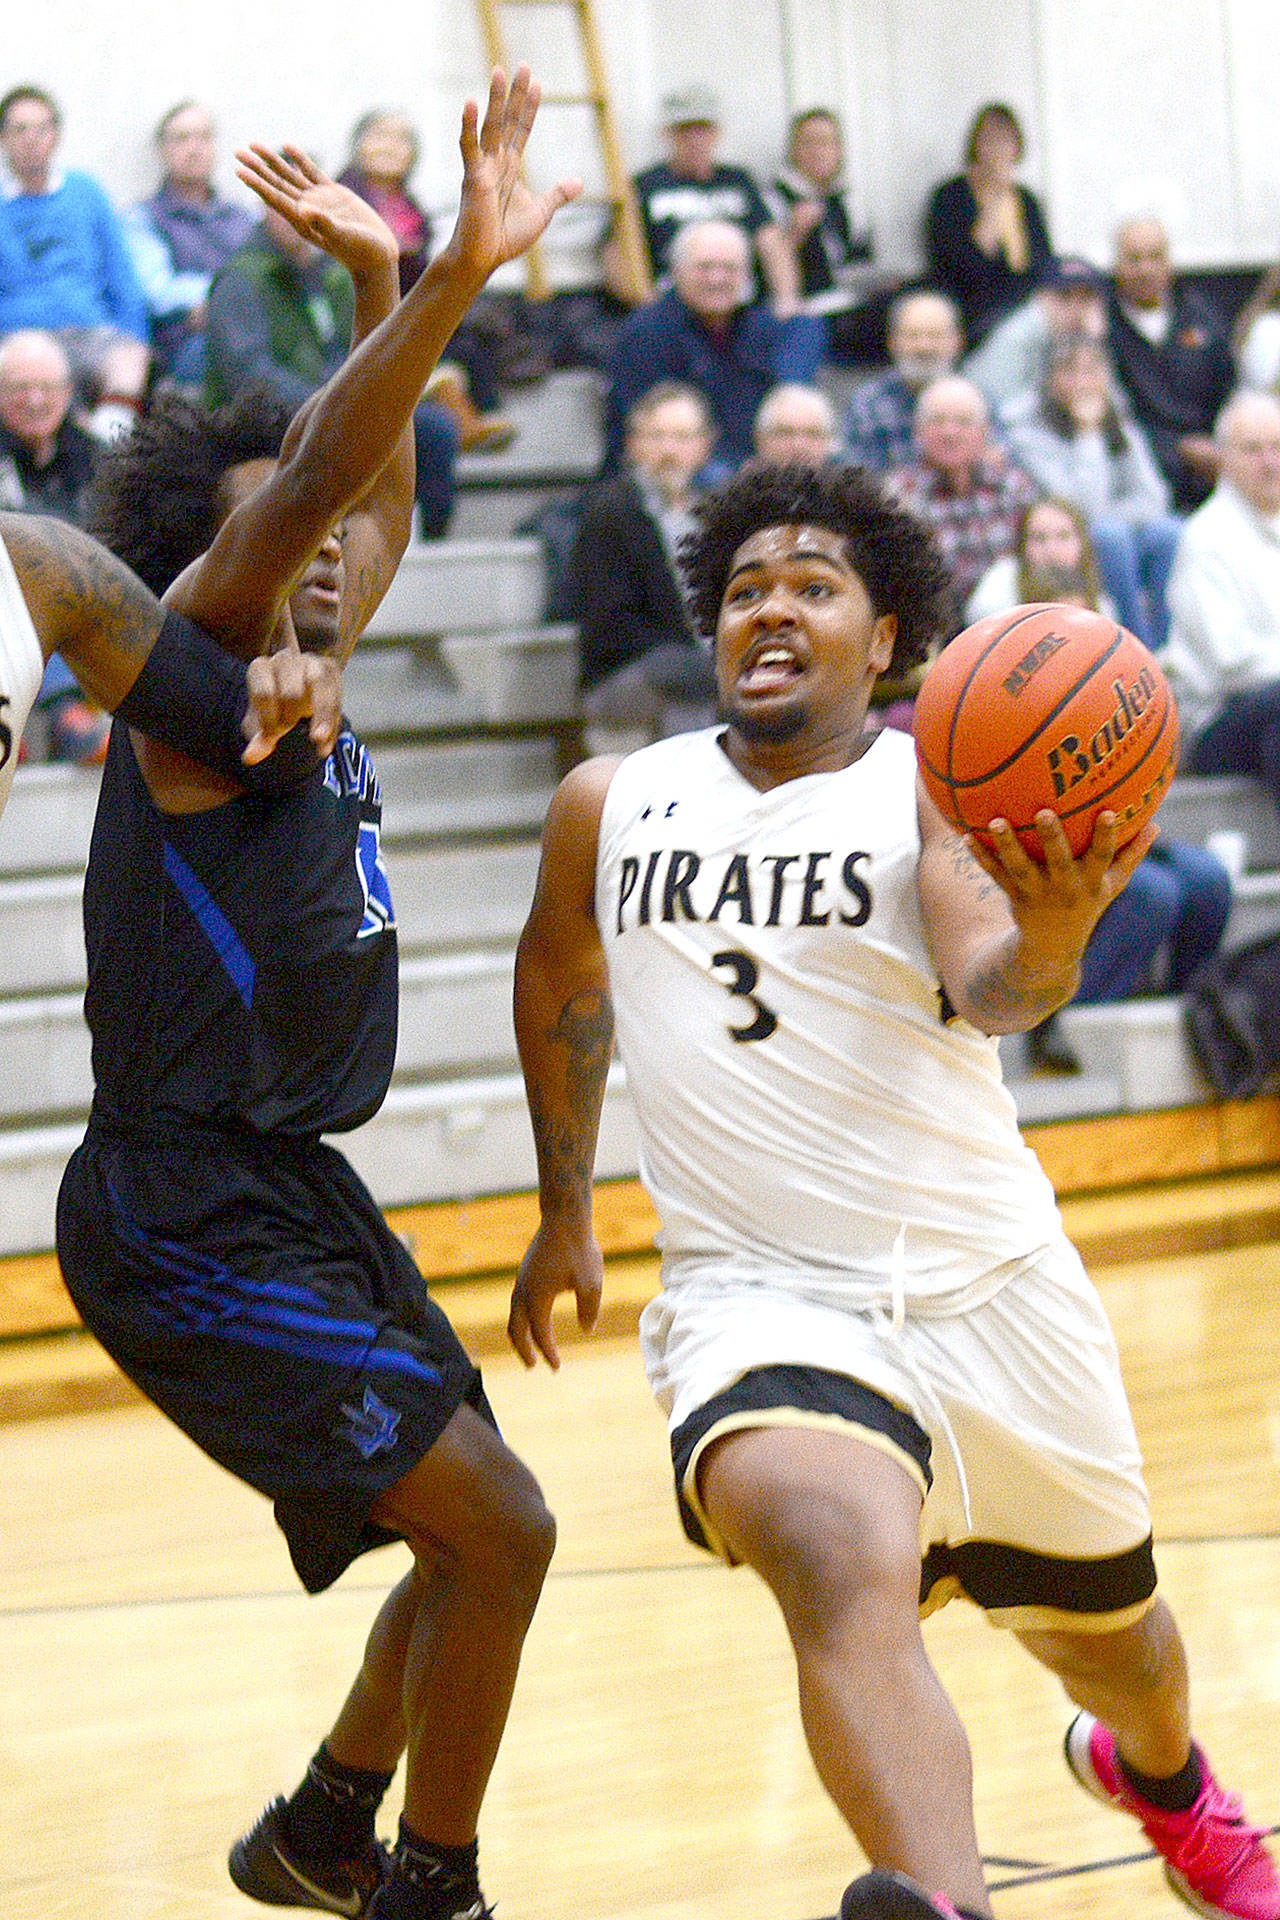 Peninsula College’s Davien Harris-Williams looks for a shot during the Pirate’s game against Edmonds Community College Saturday. (Jesse Major/for Peninsula Daily News)